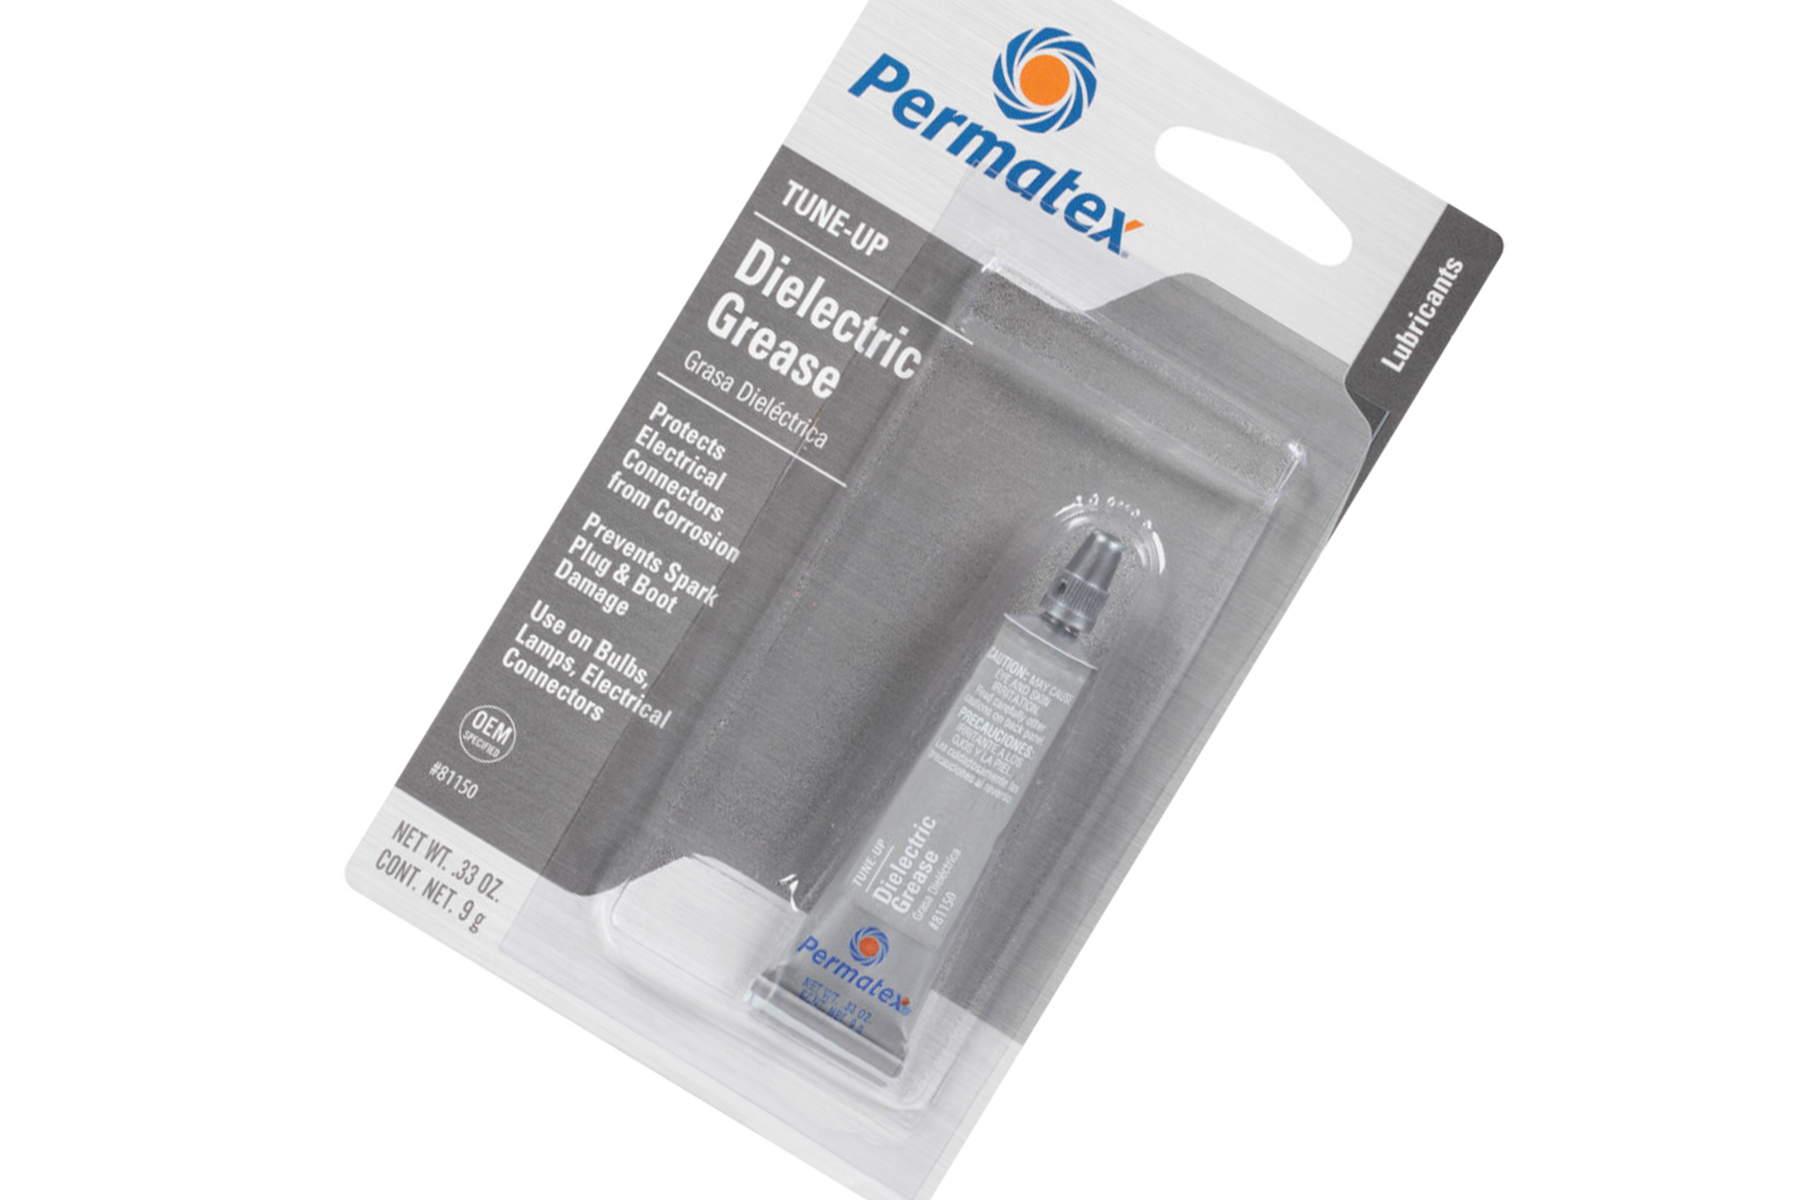 Permatex Dielectric Grease (9g) – SwitchKeys